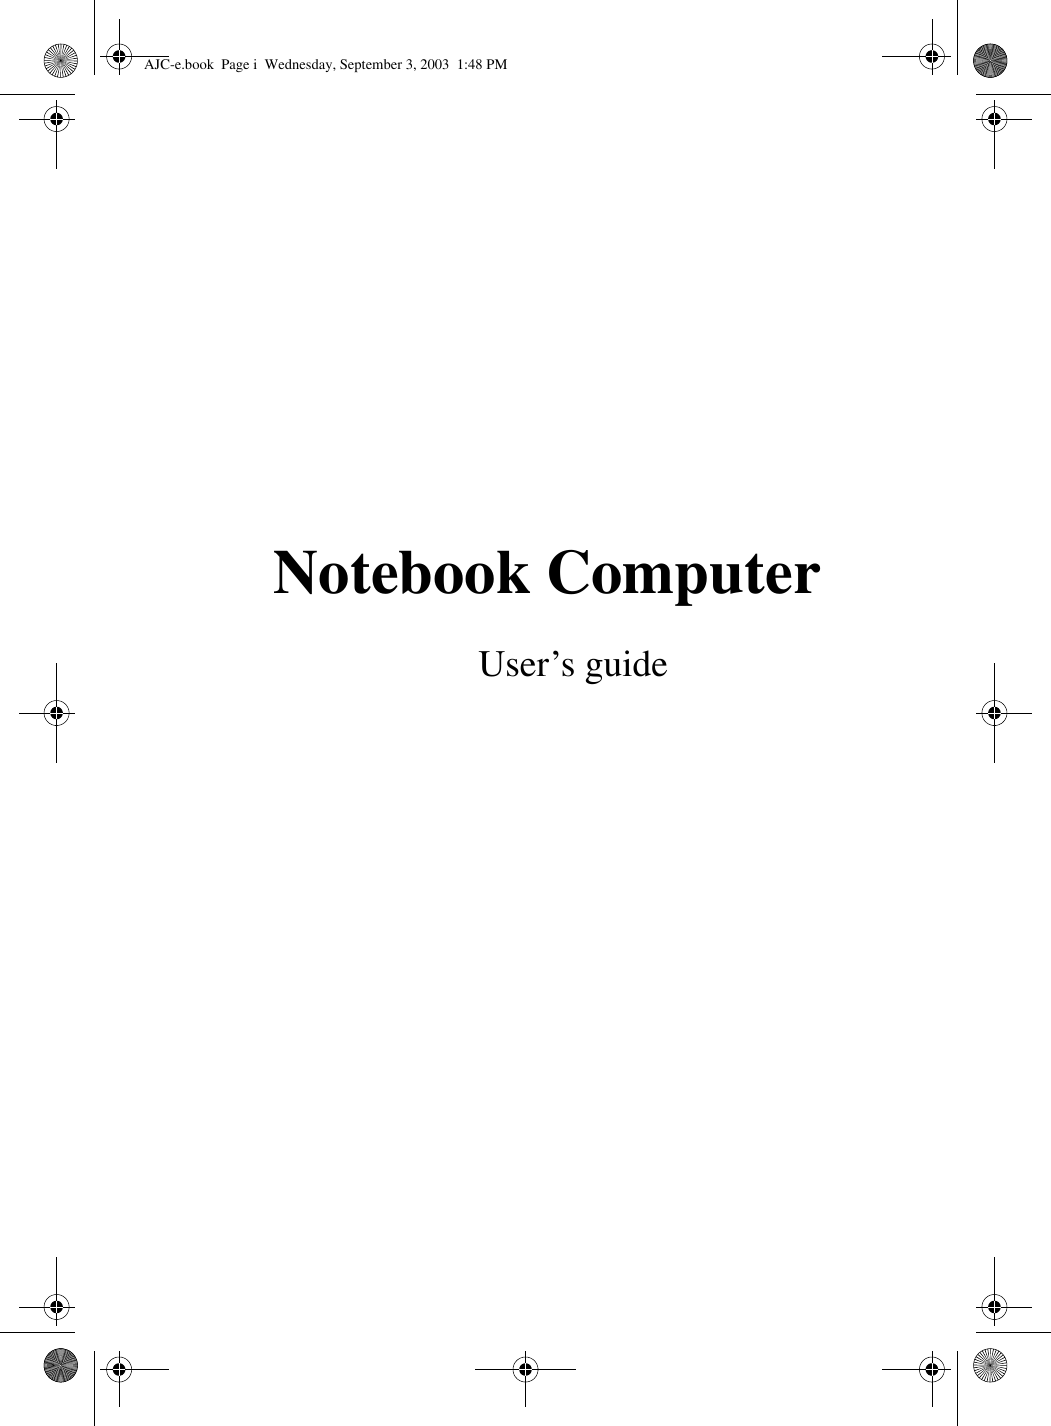 Notebook Computer User’s guideAJC-e.book  Page i  Wednesday, September 3, 2003  1:48 PM